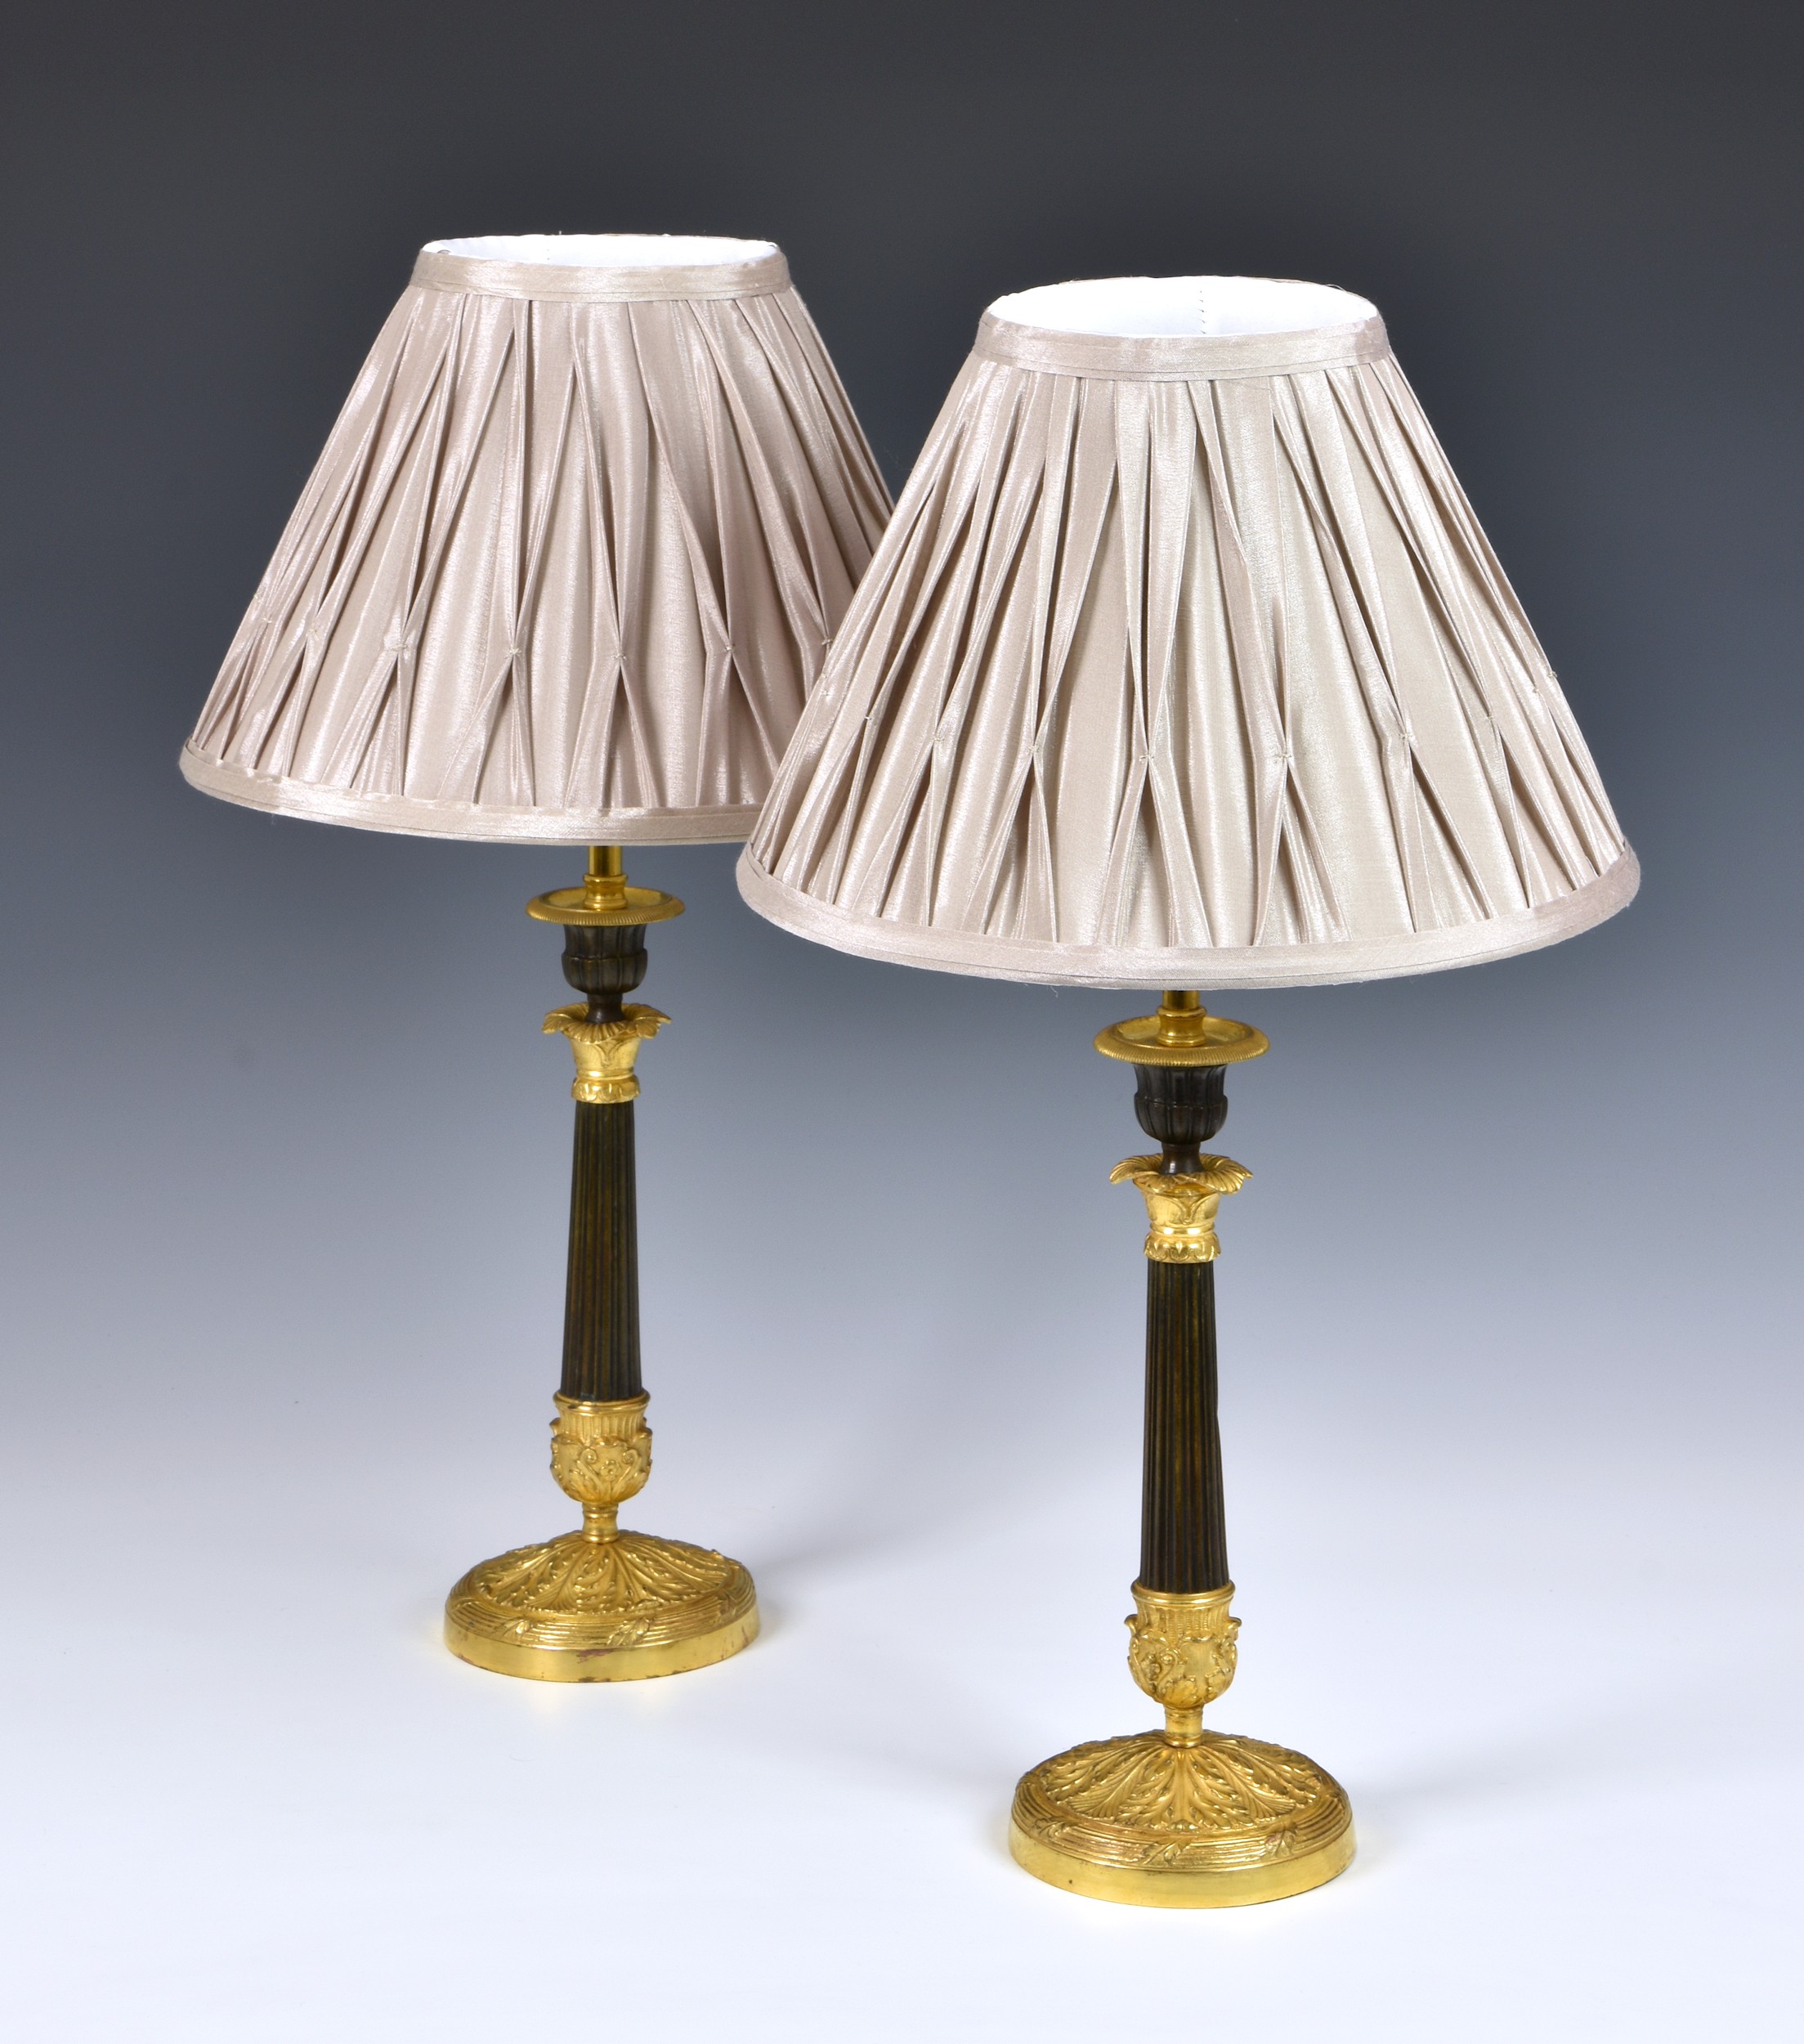 A pair of French patinated bronze and ormolu candlesticks, 19th century, the gadrooned urn sconces